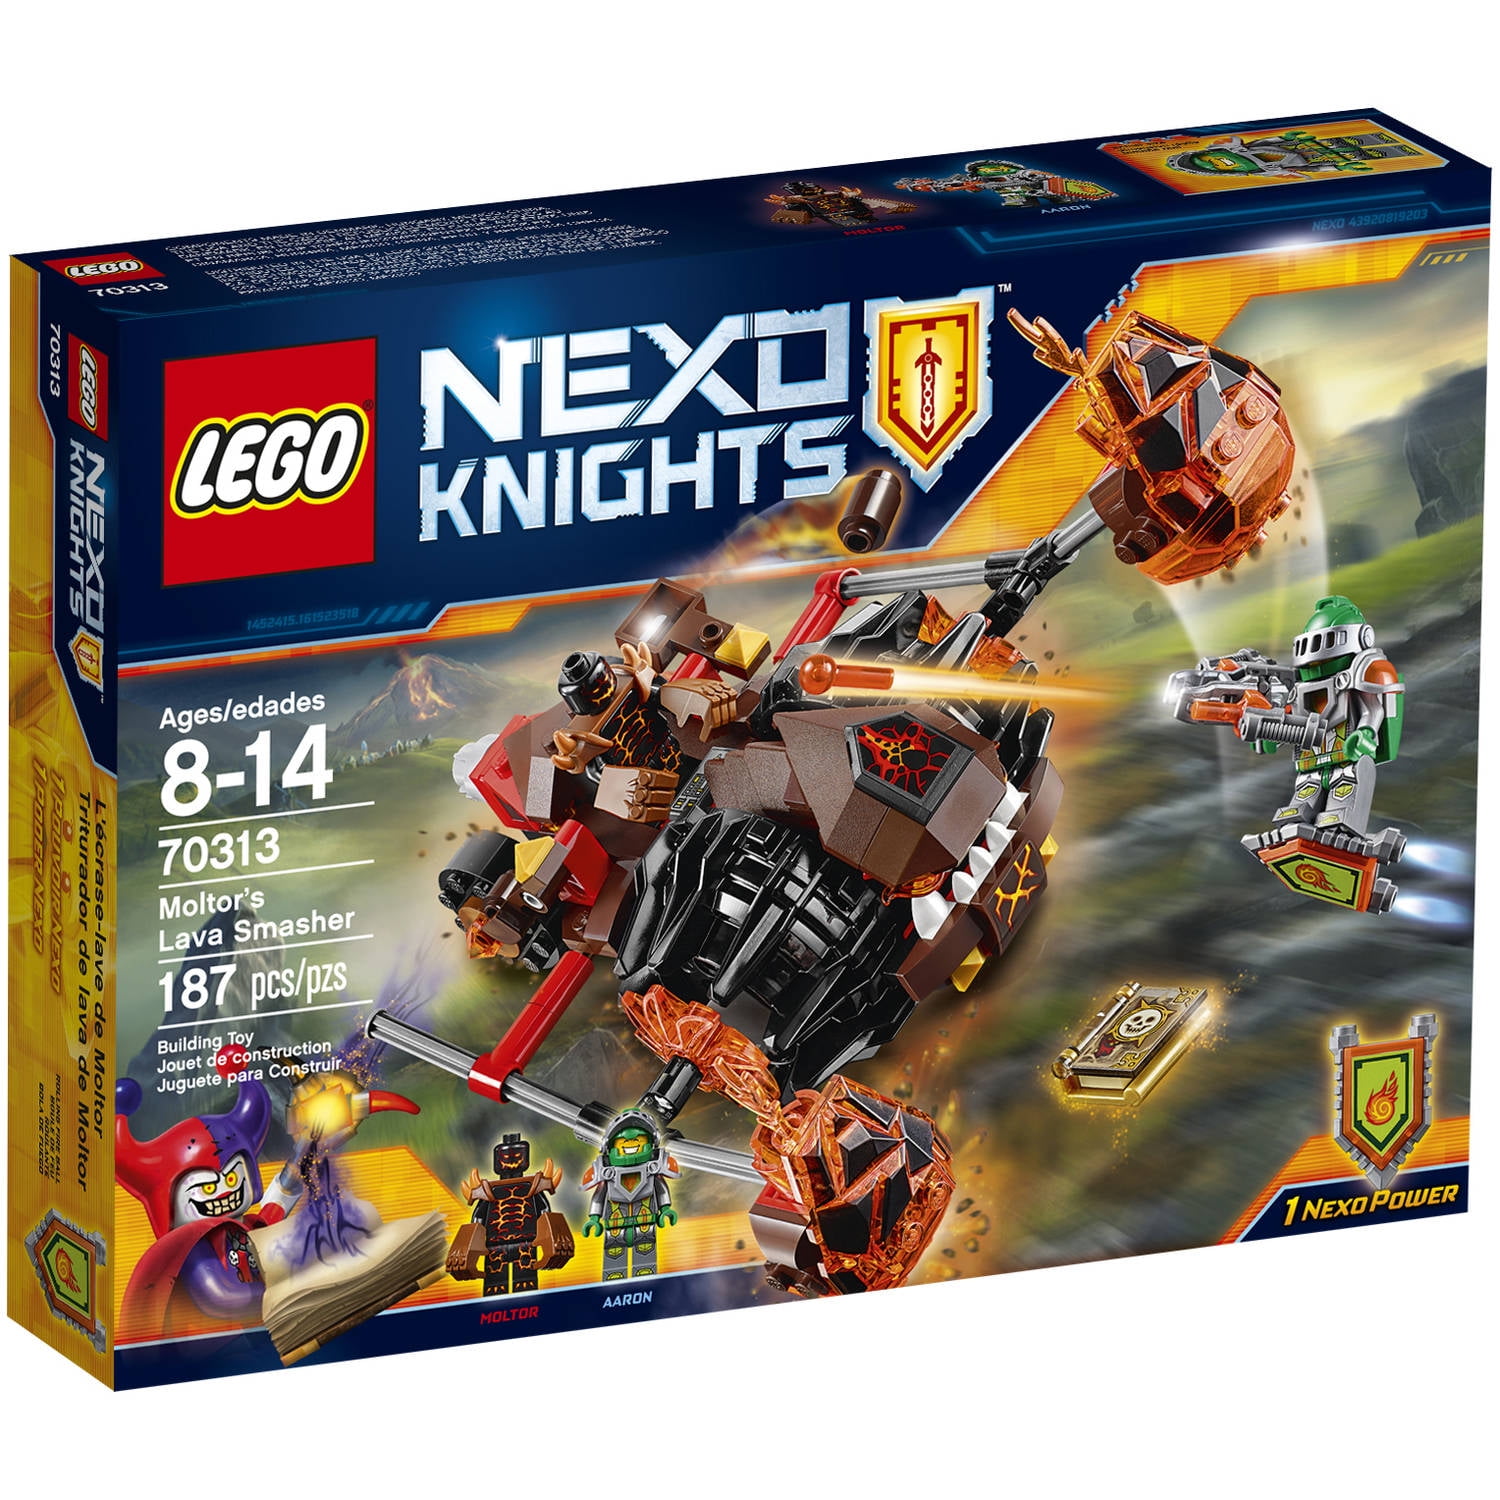 PICK 1S U WANT NEW LEGO NEXO KNIGHTS TRADING CARDS BUY 1 GET 1 FREE INCL FOILS 